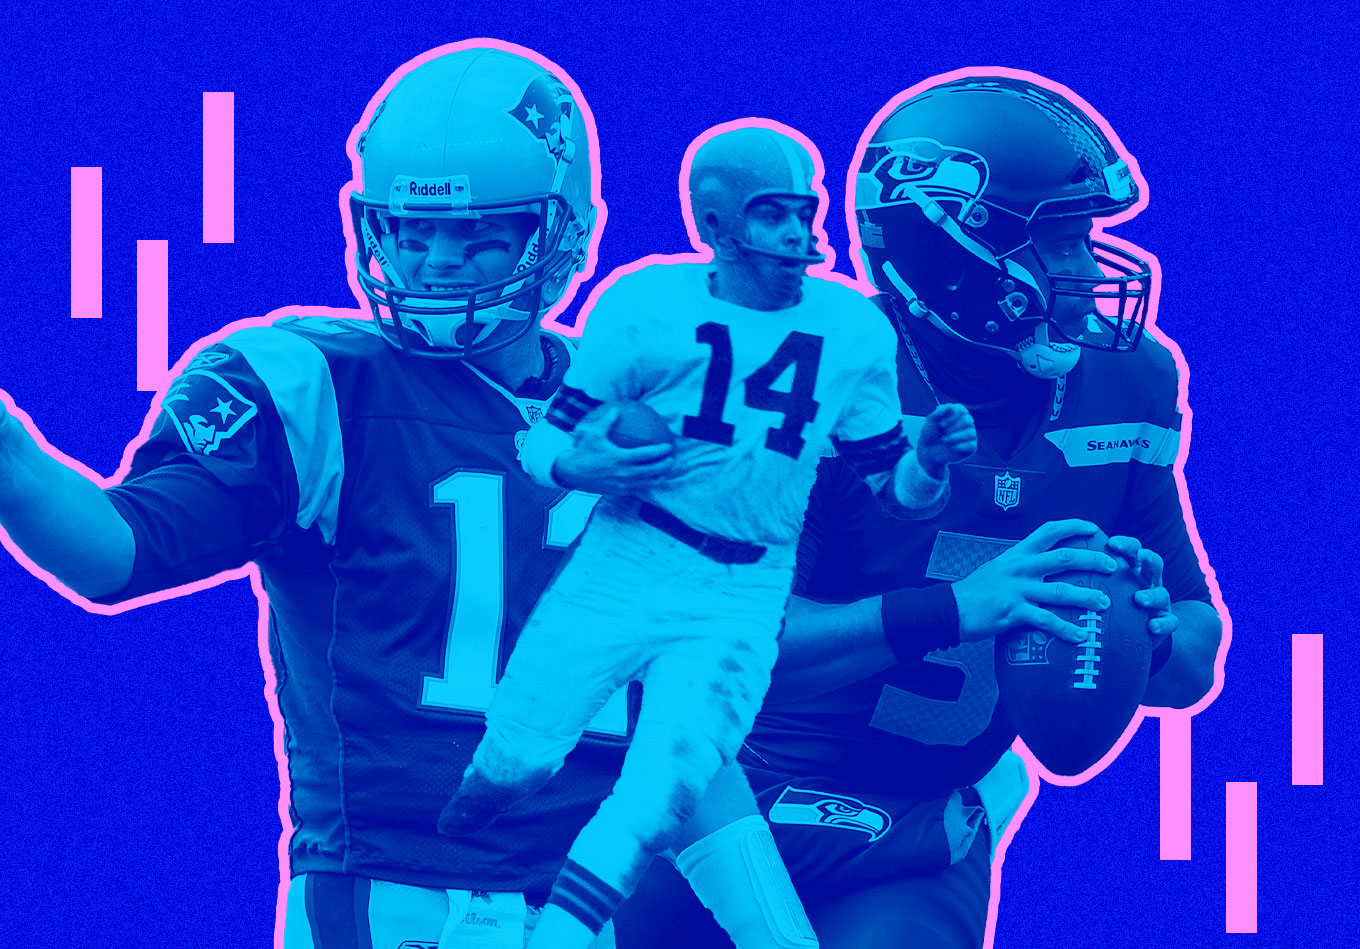 Running It Up: The Biggest Blowouts in NFL History